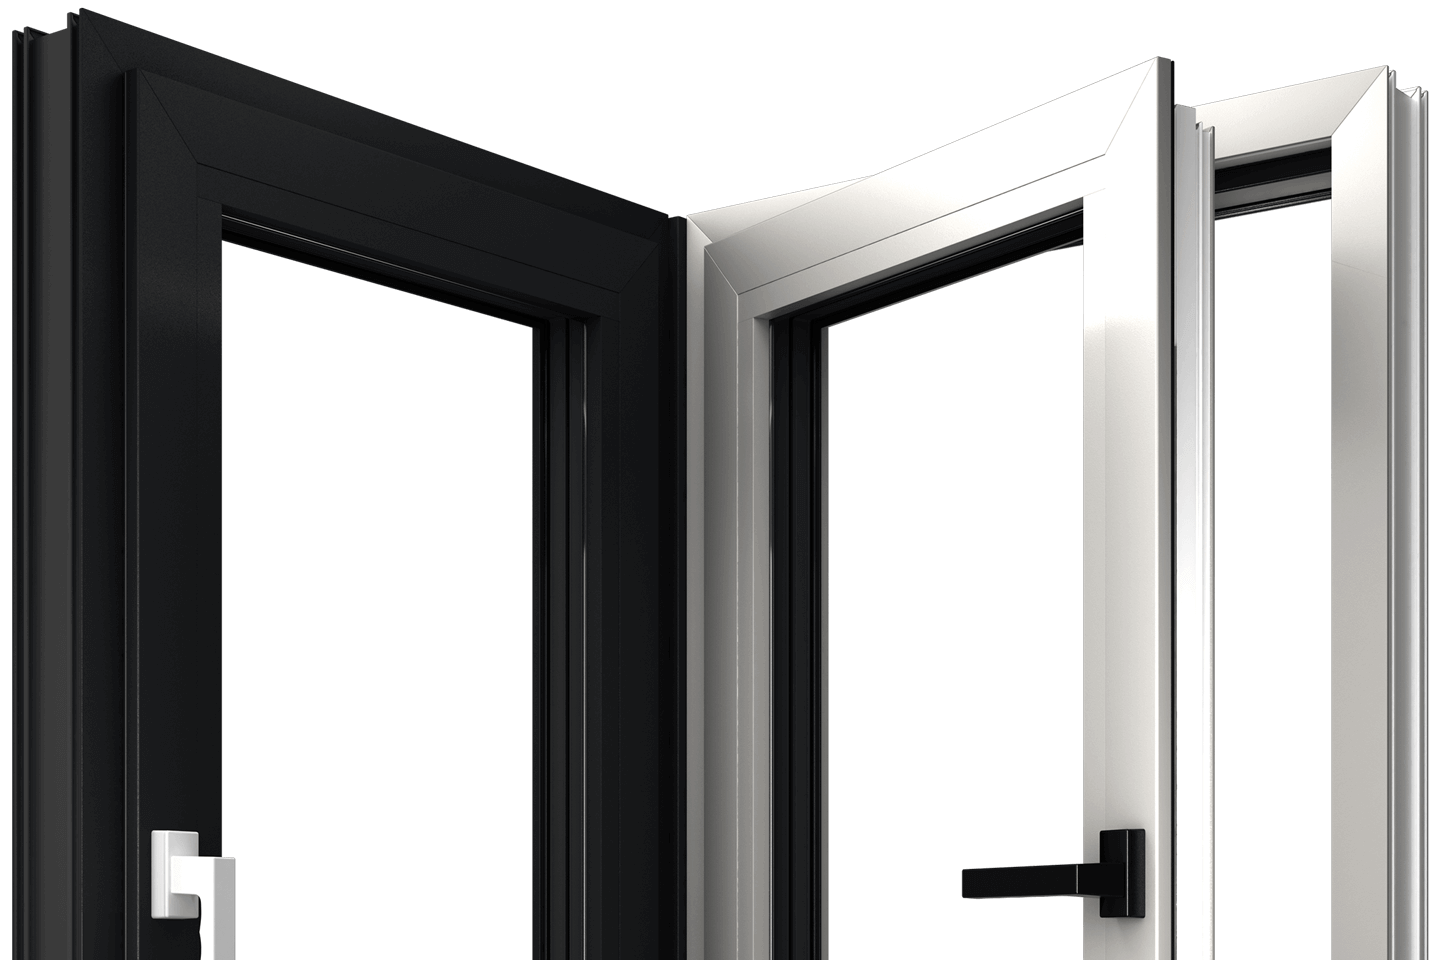 FORMA windows - dark with a white handle and bright with a black handle.